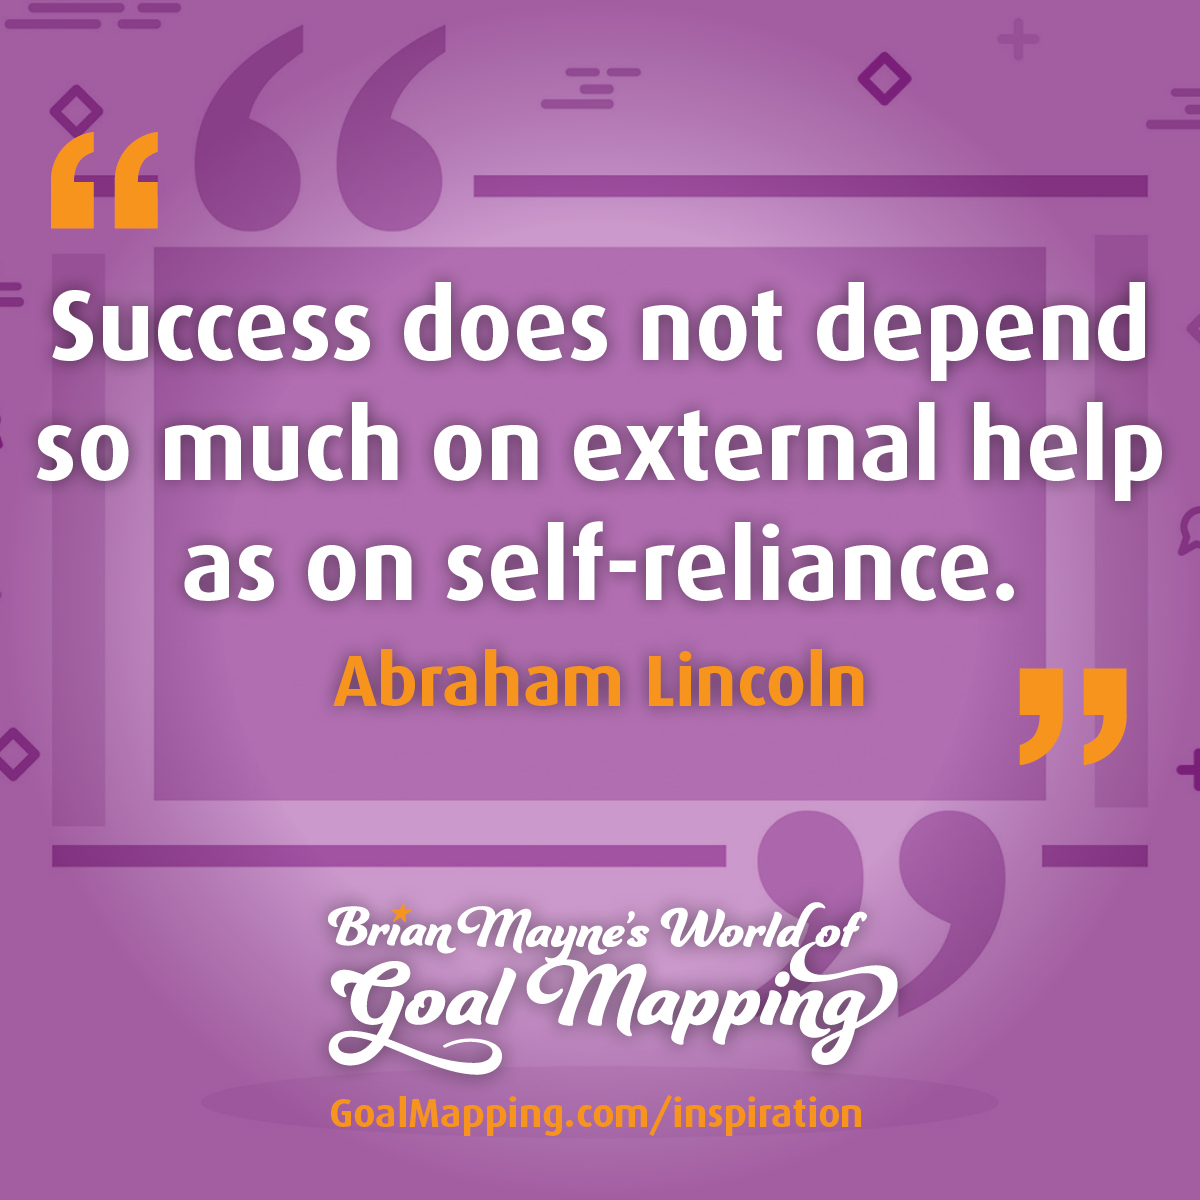 "Success does not depend so much on external help as on self-reliance." Abraham Lincoln